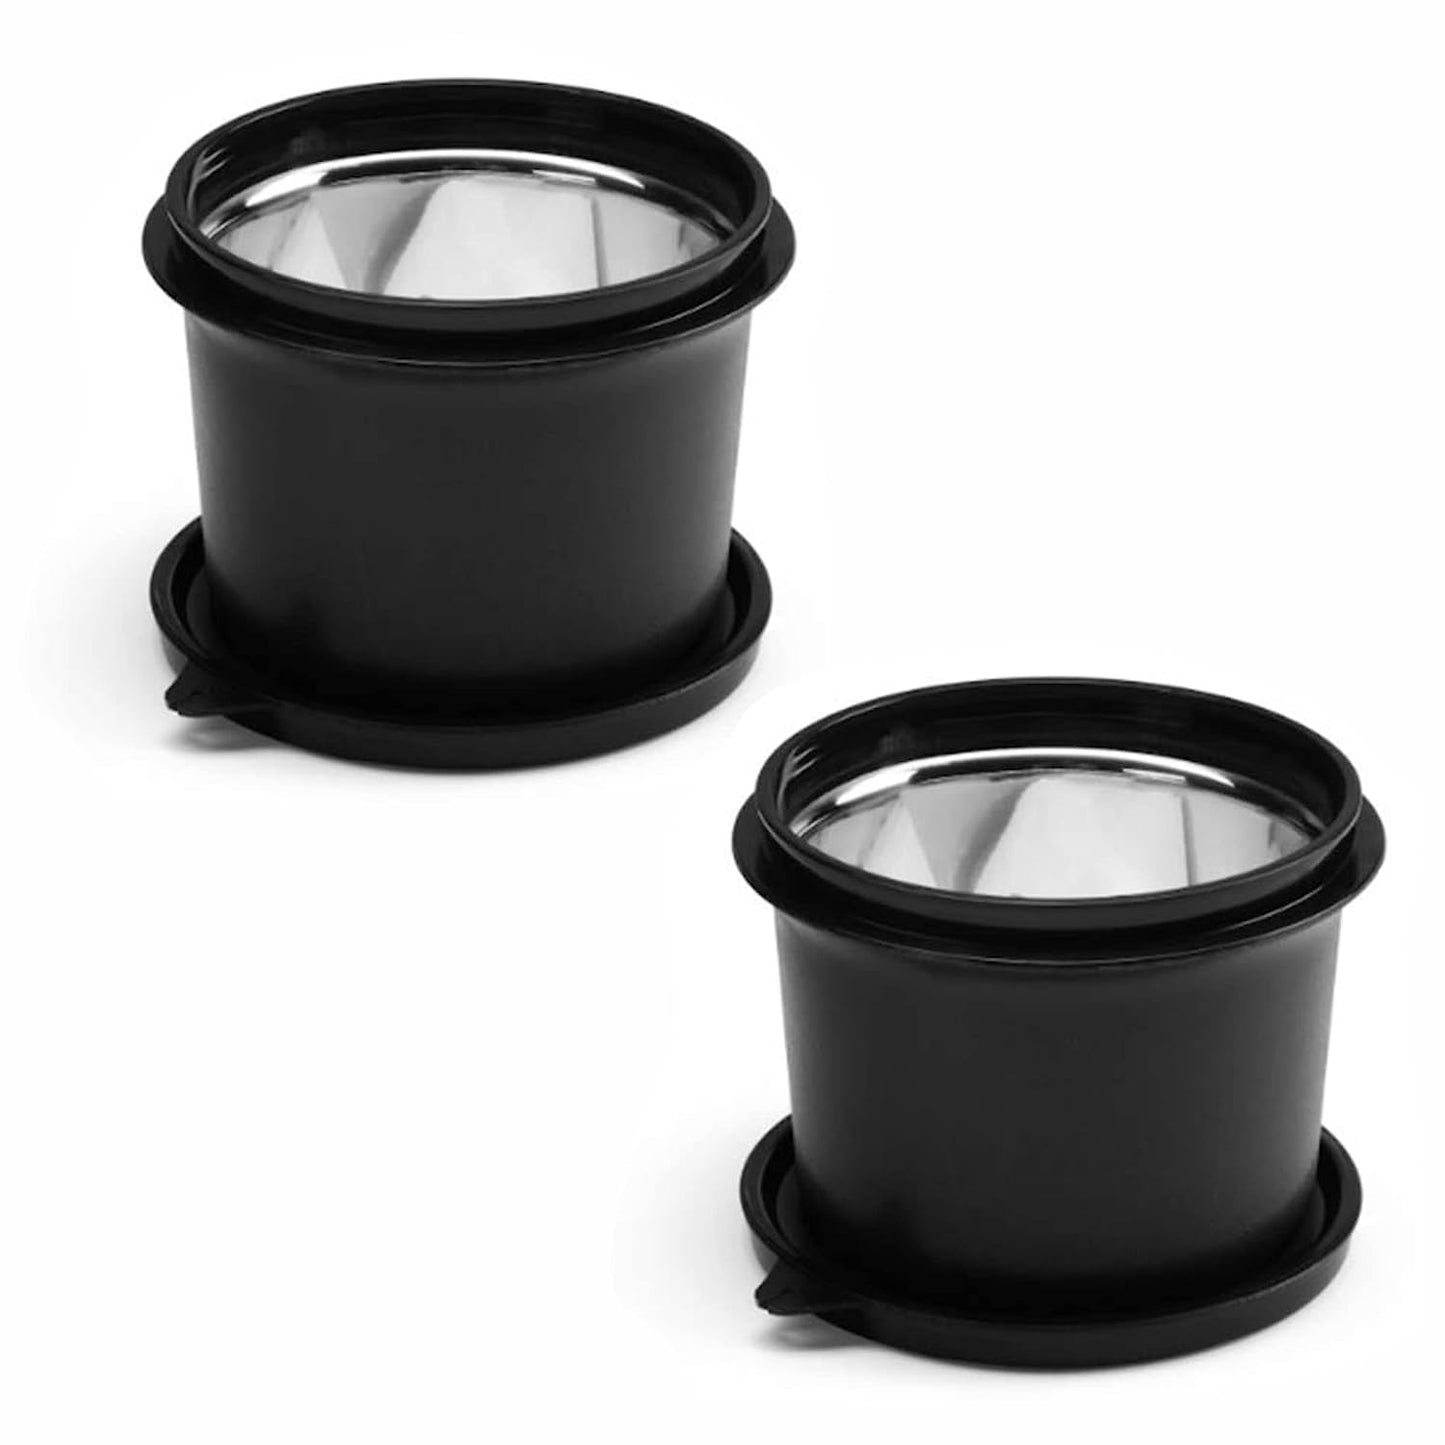 Benny Containers - Set of 2 (600 ML)